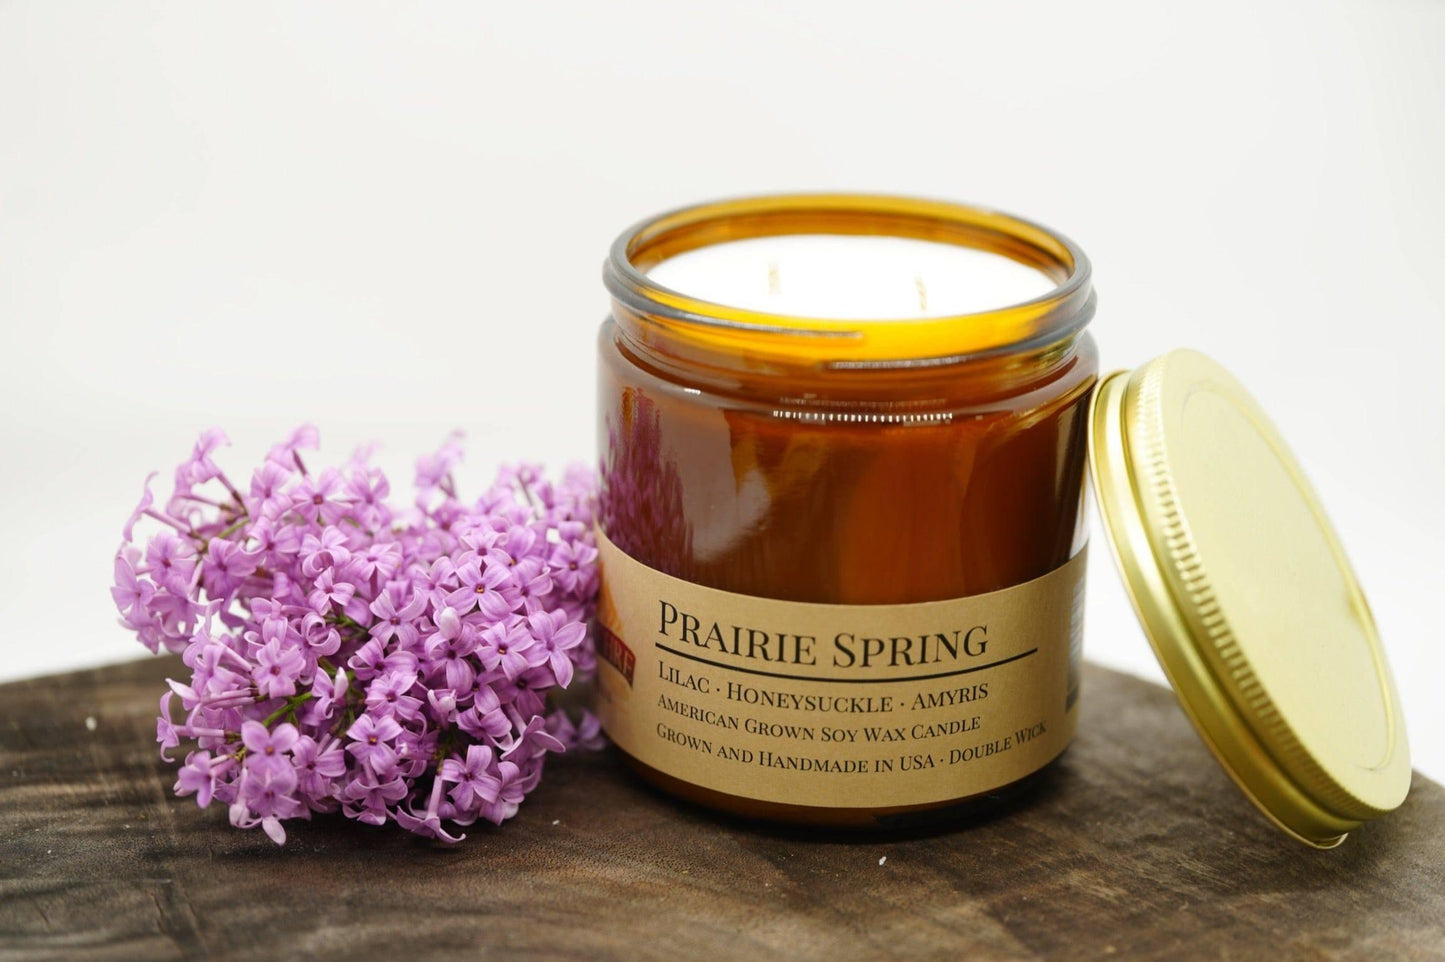 Prairie Spring Soy Wax Candle | 16 oz Double Wick Amber Apothecary Jar - Prairie Fire Candles